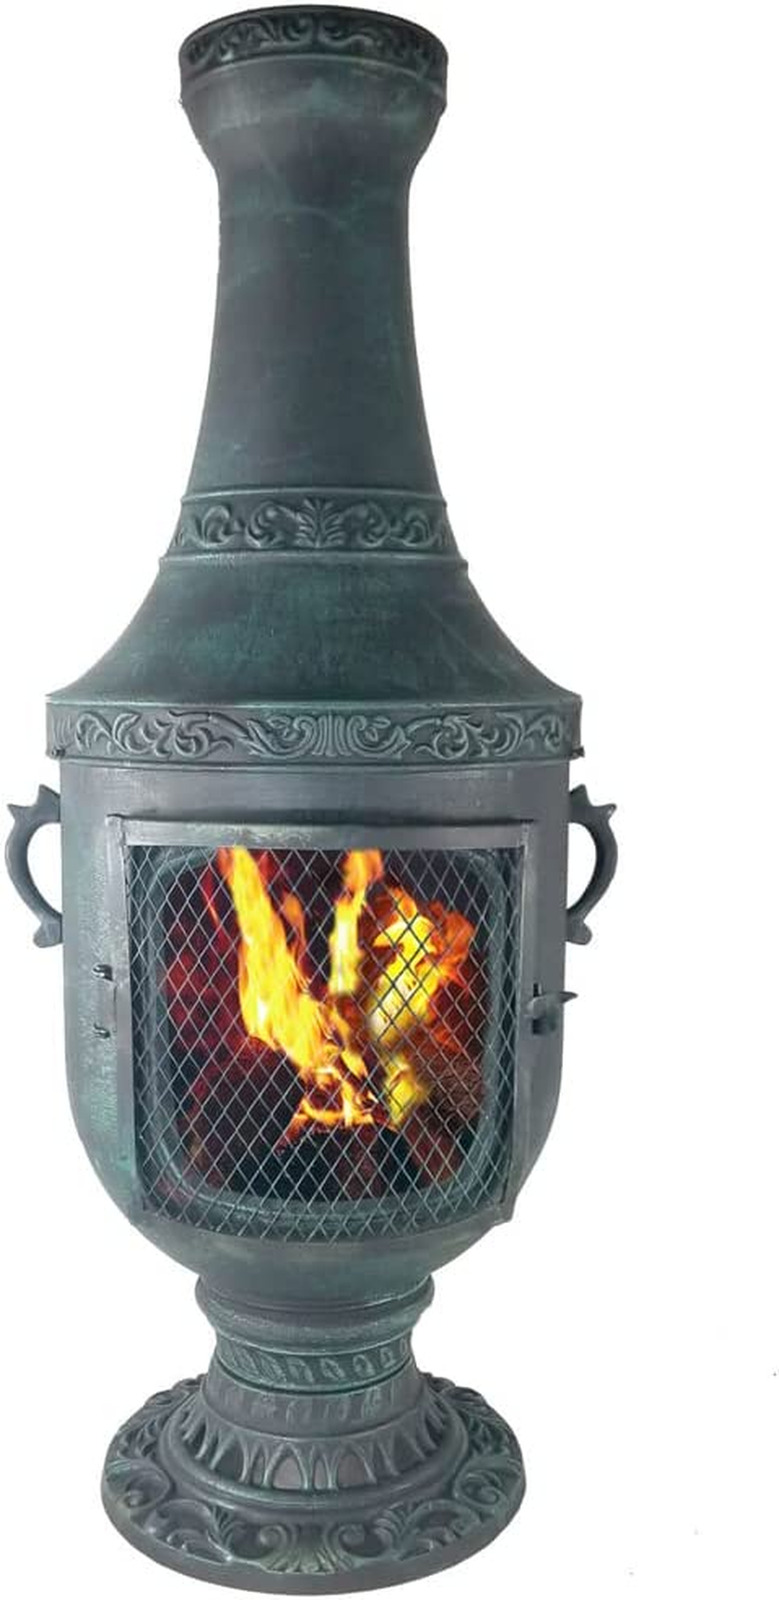 The Blue Rooster Venetian Cast Aluminum Grill & Oven Chiminea in Antique Green